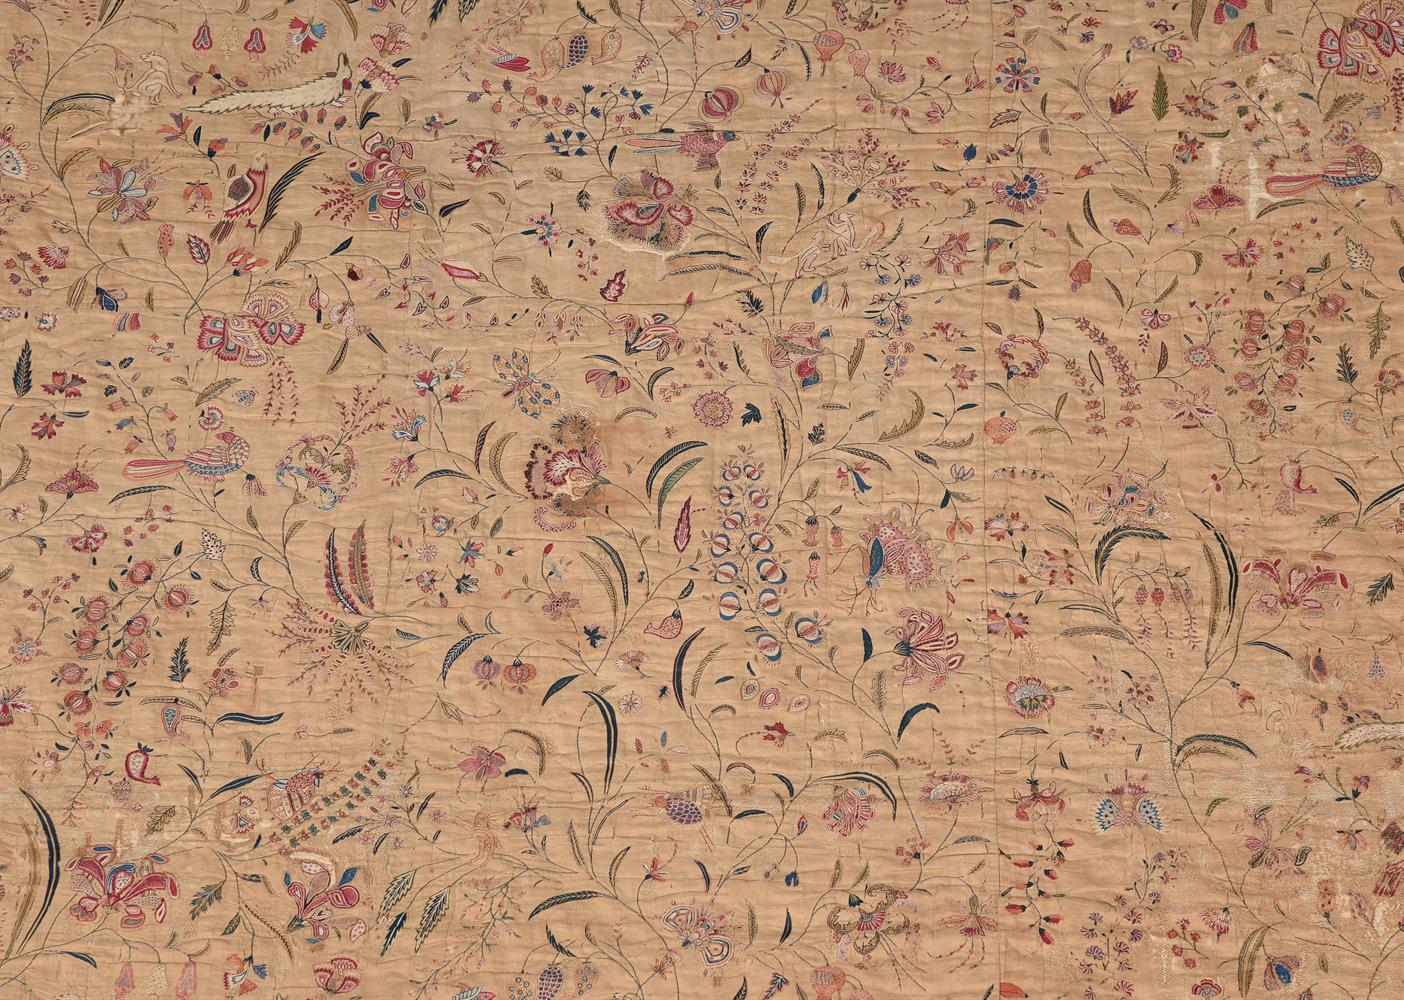 A FINELY EMBROIDERED MUGHAL SUMMER CARPET OR FLOOR SPREAD, INDIAN, 18TH/19TH CENTURY - Image 2 of 6